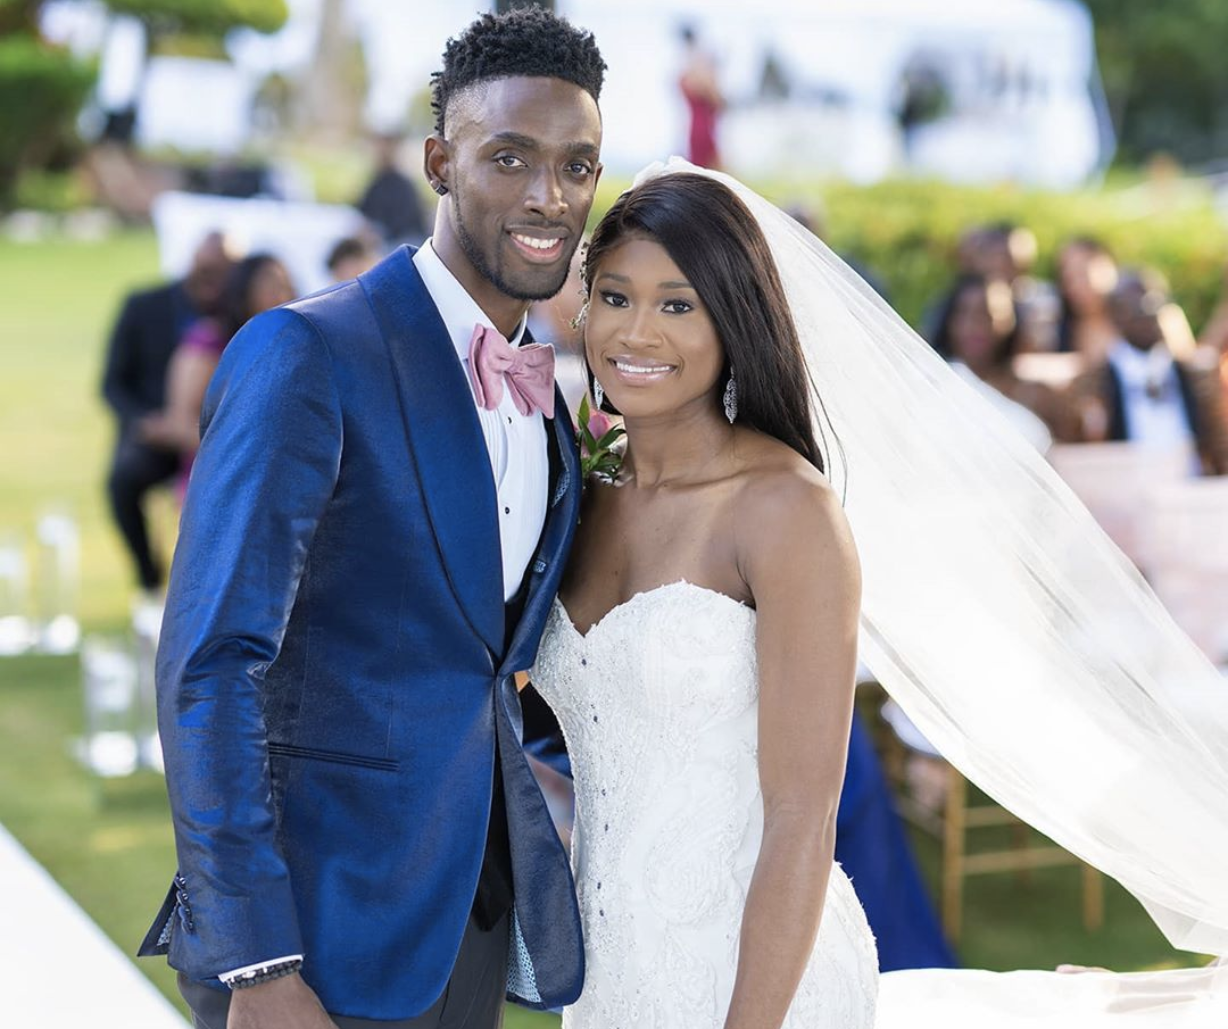 Bailey-Cole and Tracey tie the knot